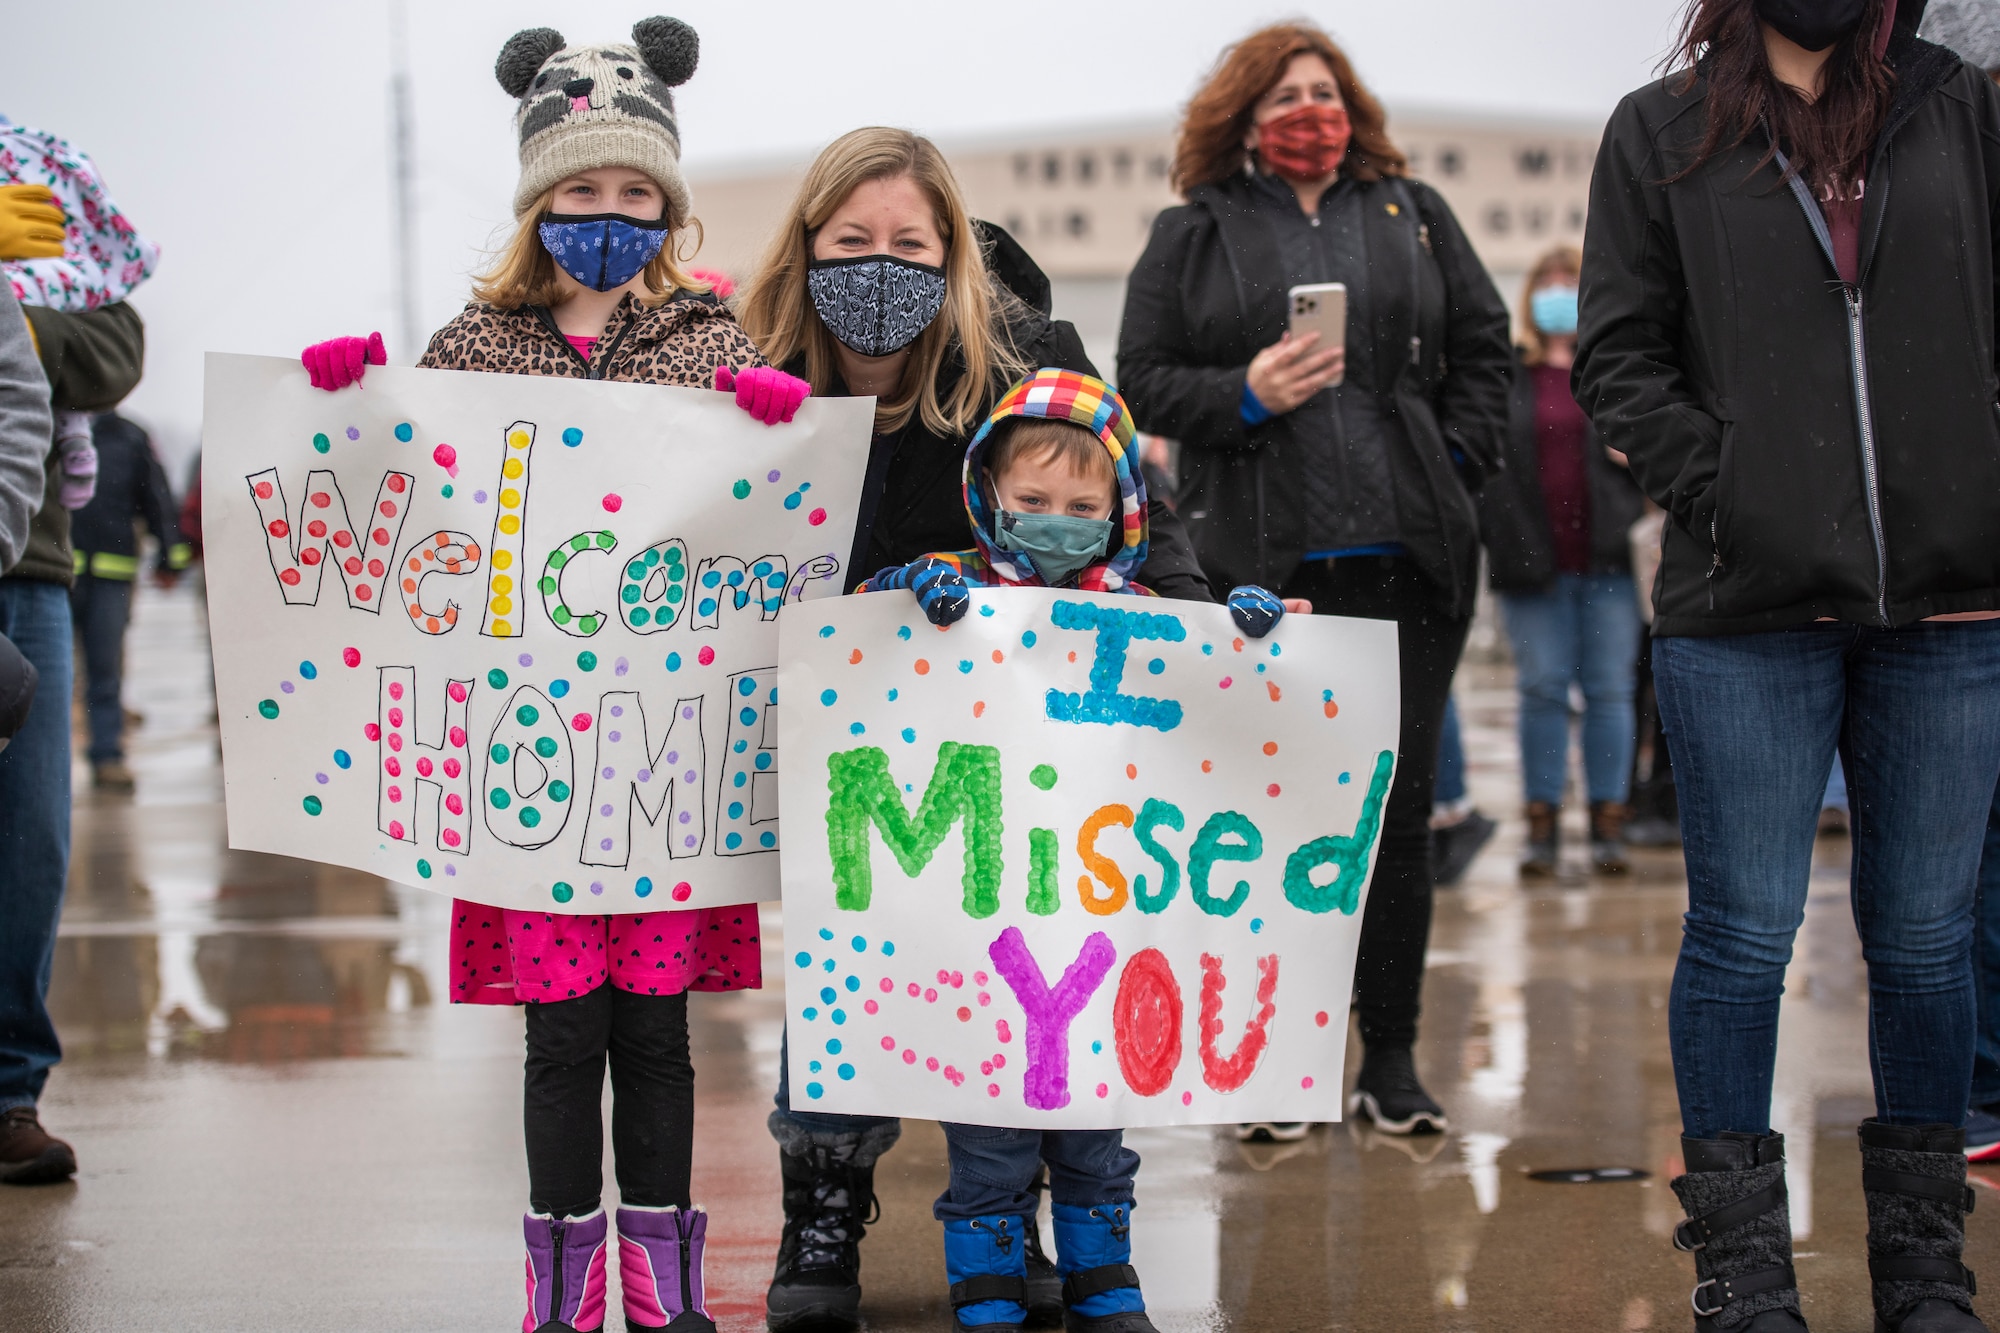 Family members await the return Airmen after an overseas deployment, Jan. 26, 2020 at the 180FW in Swanton, Ohio.